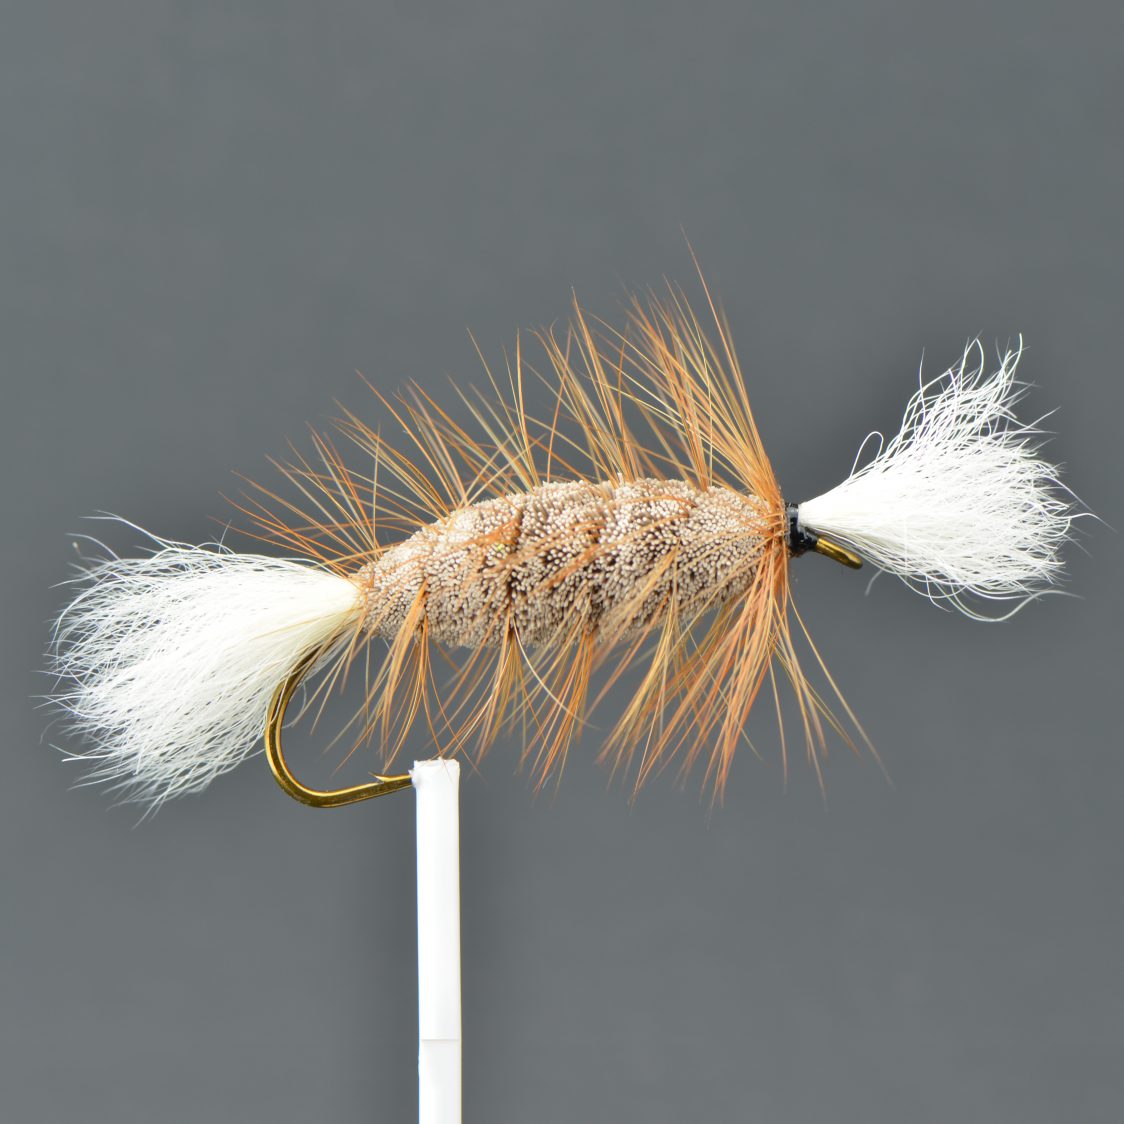 Gray Cigar – White Tail – Brown Hackle